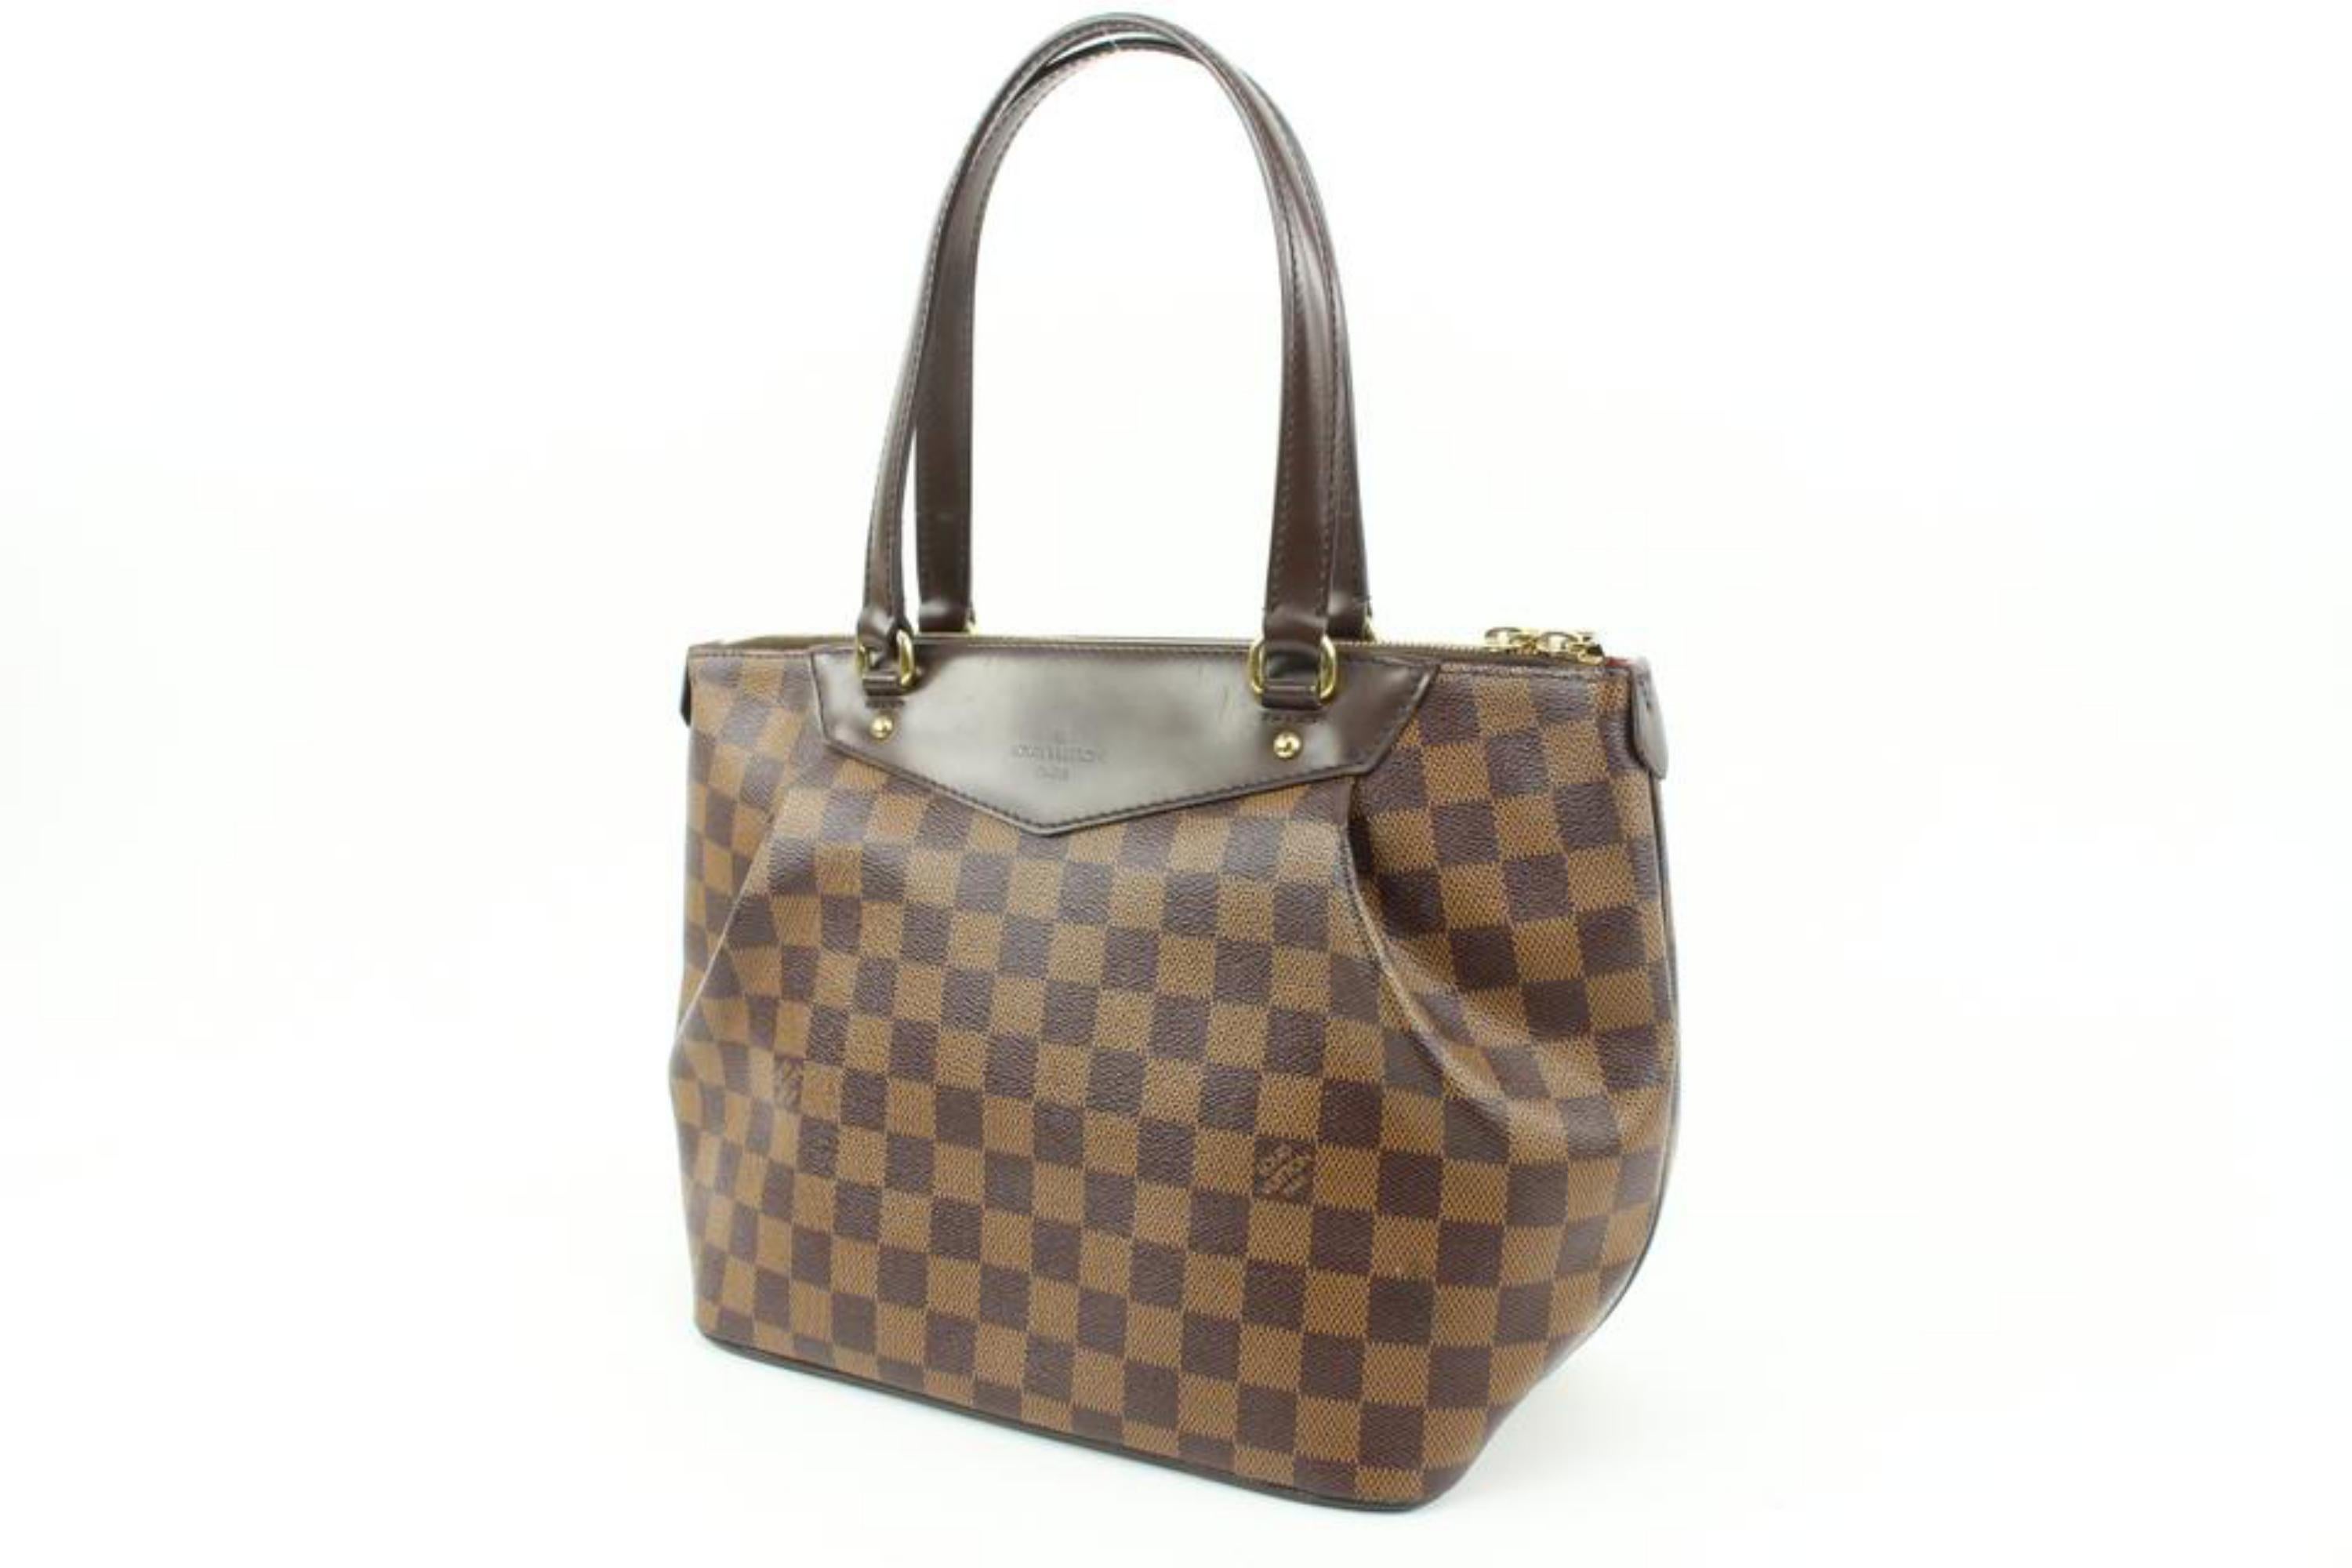 Louis Vuitton Discontinued Damier Ebene Westminster PM Zip Tote Bag s27lv4
Date Code/Serial Number: VI1141
Made In: France
Measurements: Length:  14